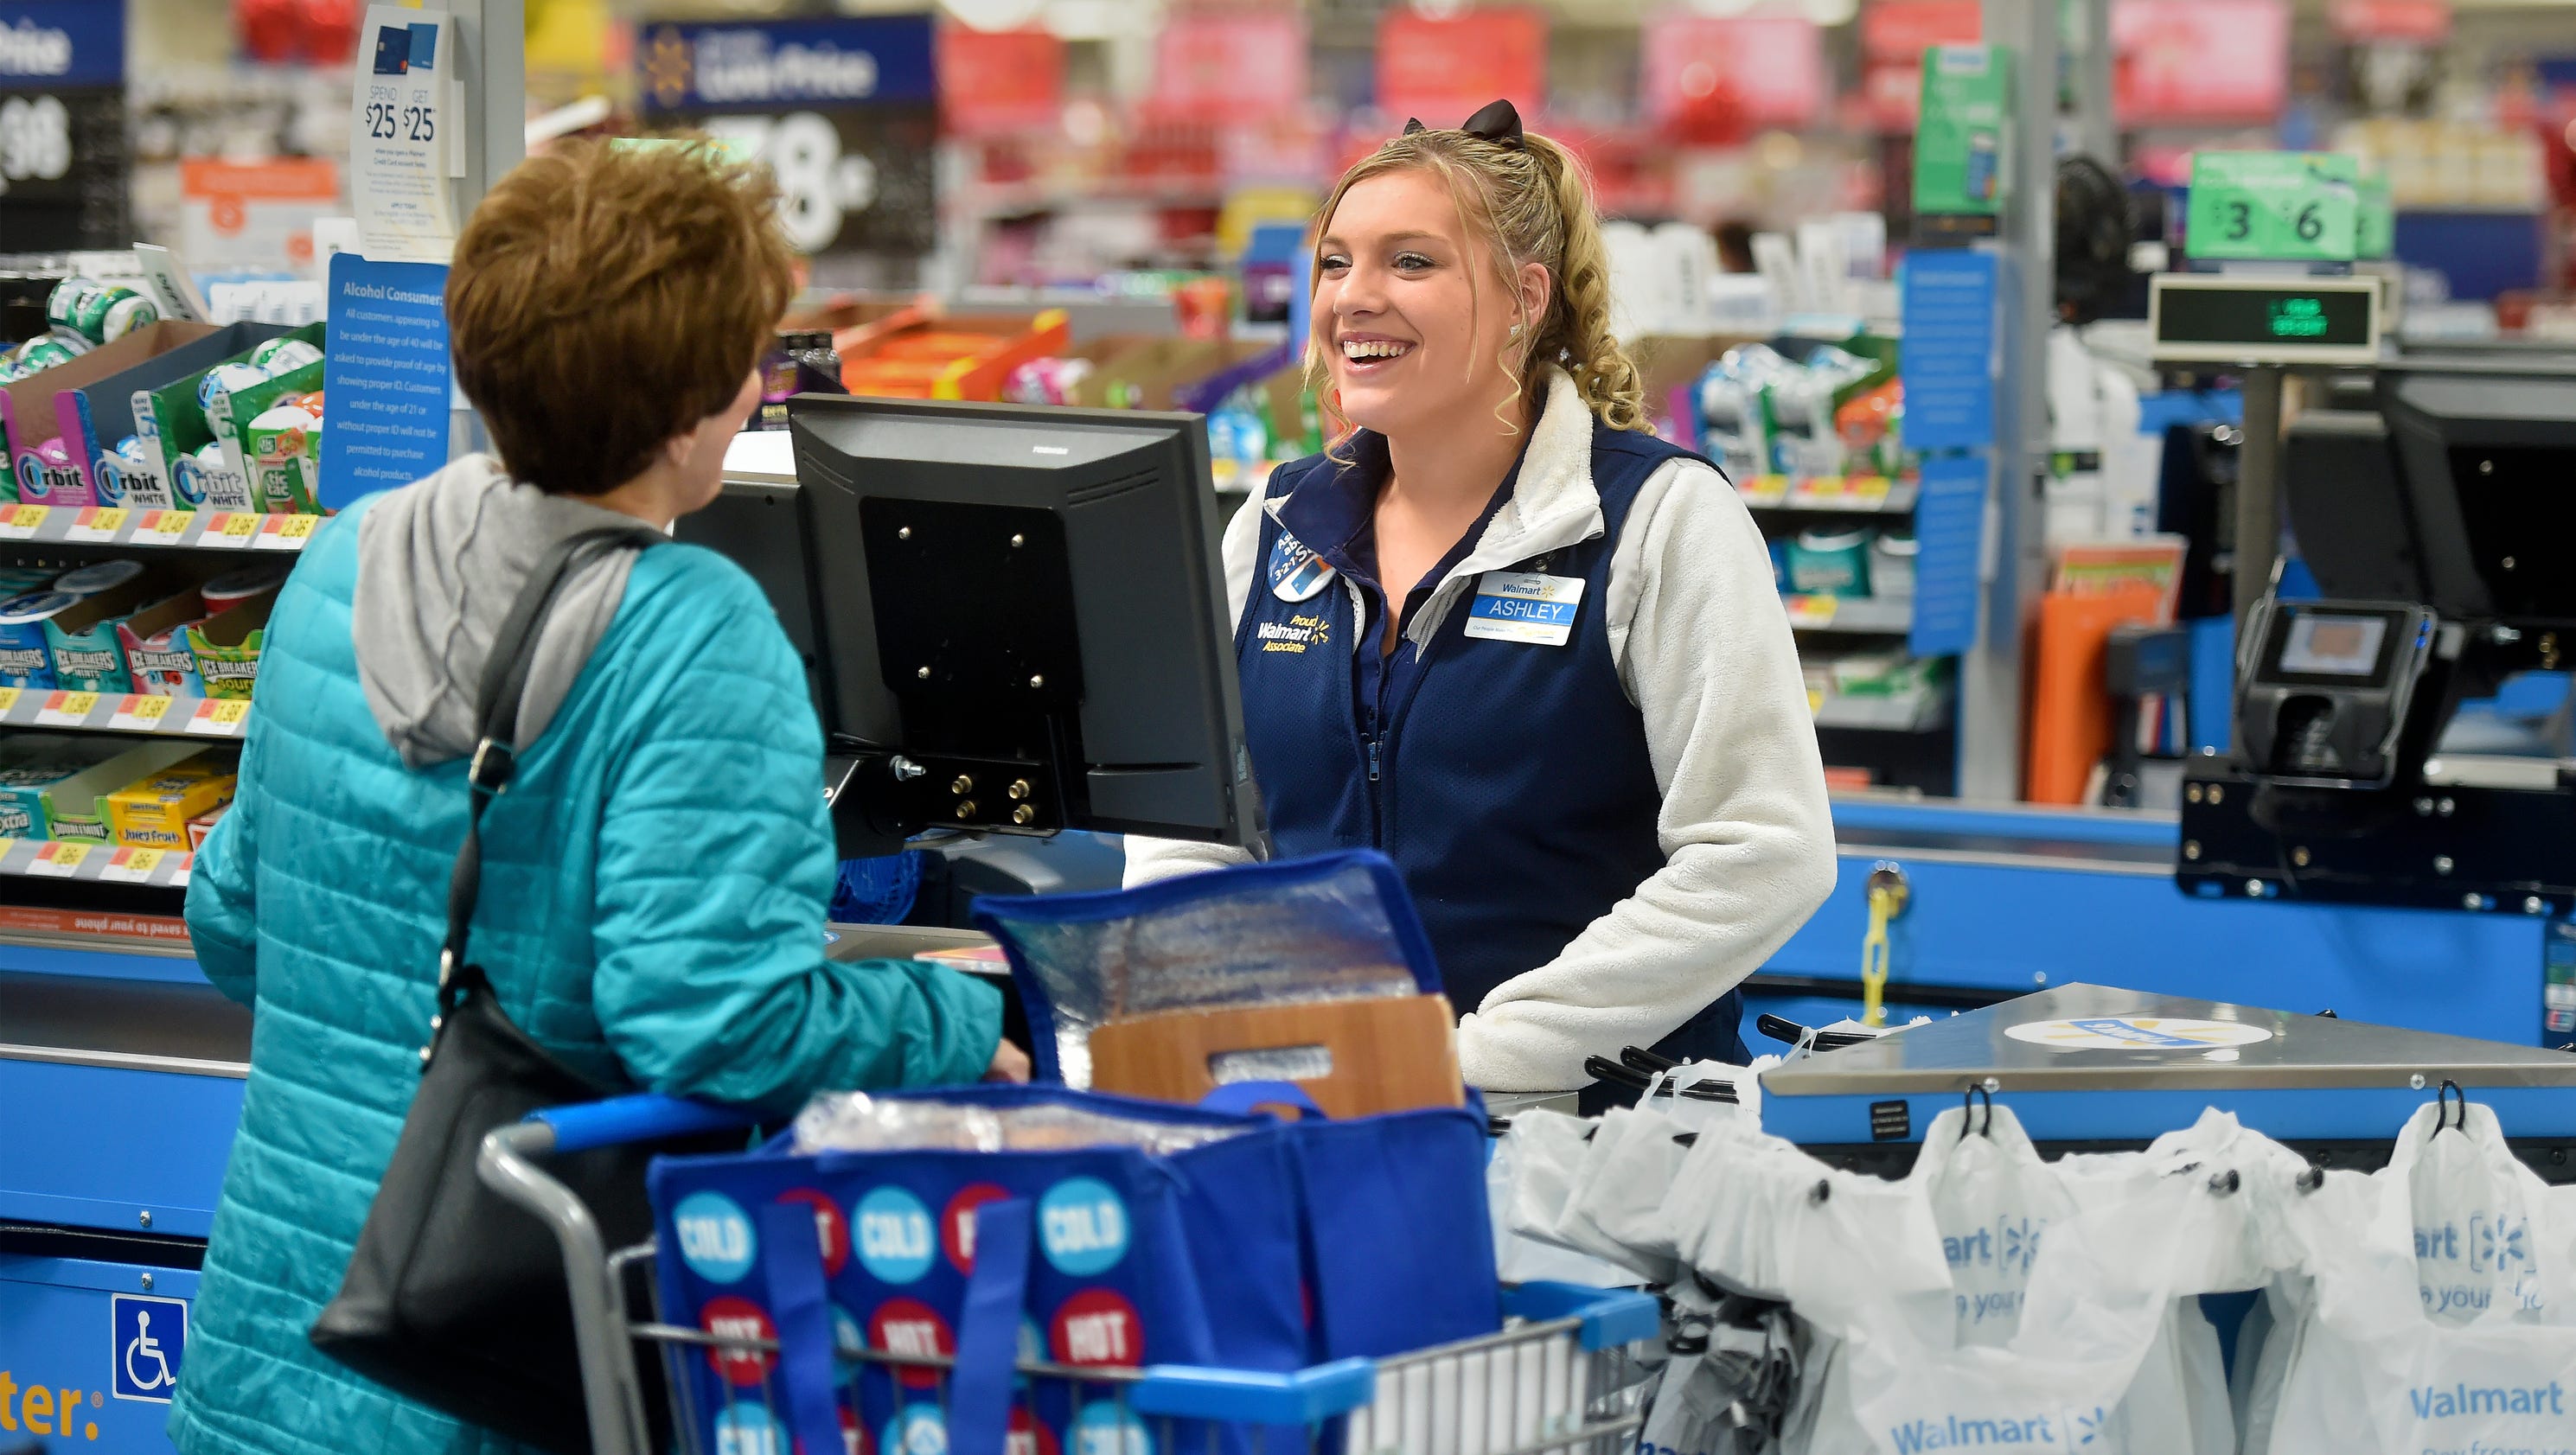 Wal-Mart announces wage hikes, bonuses for Montana workers